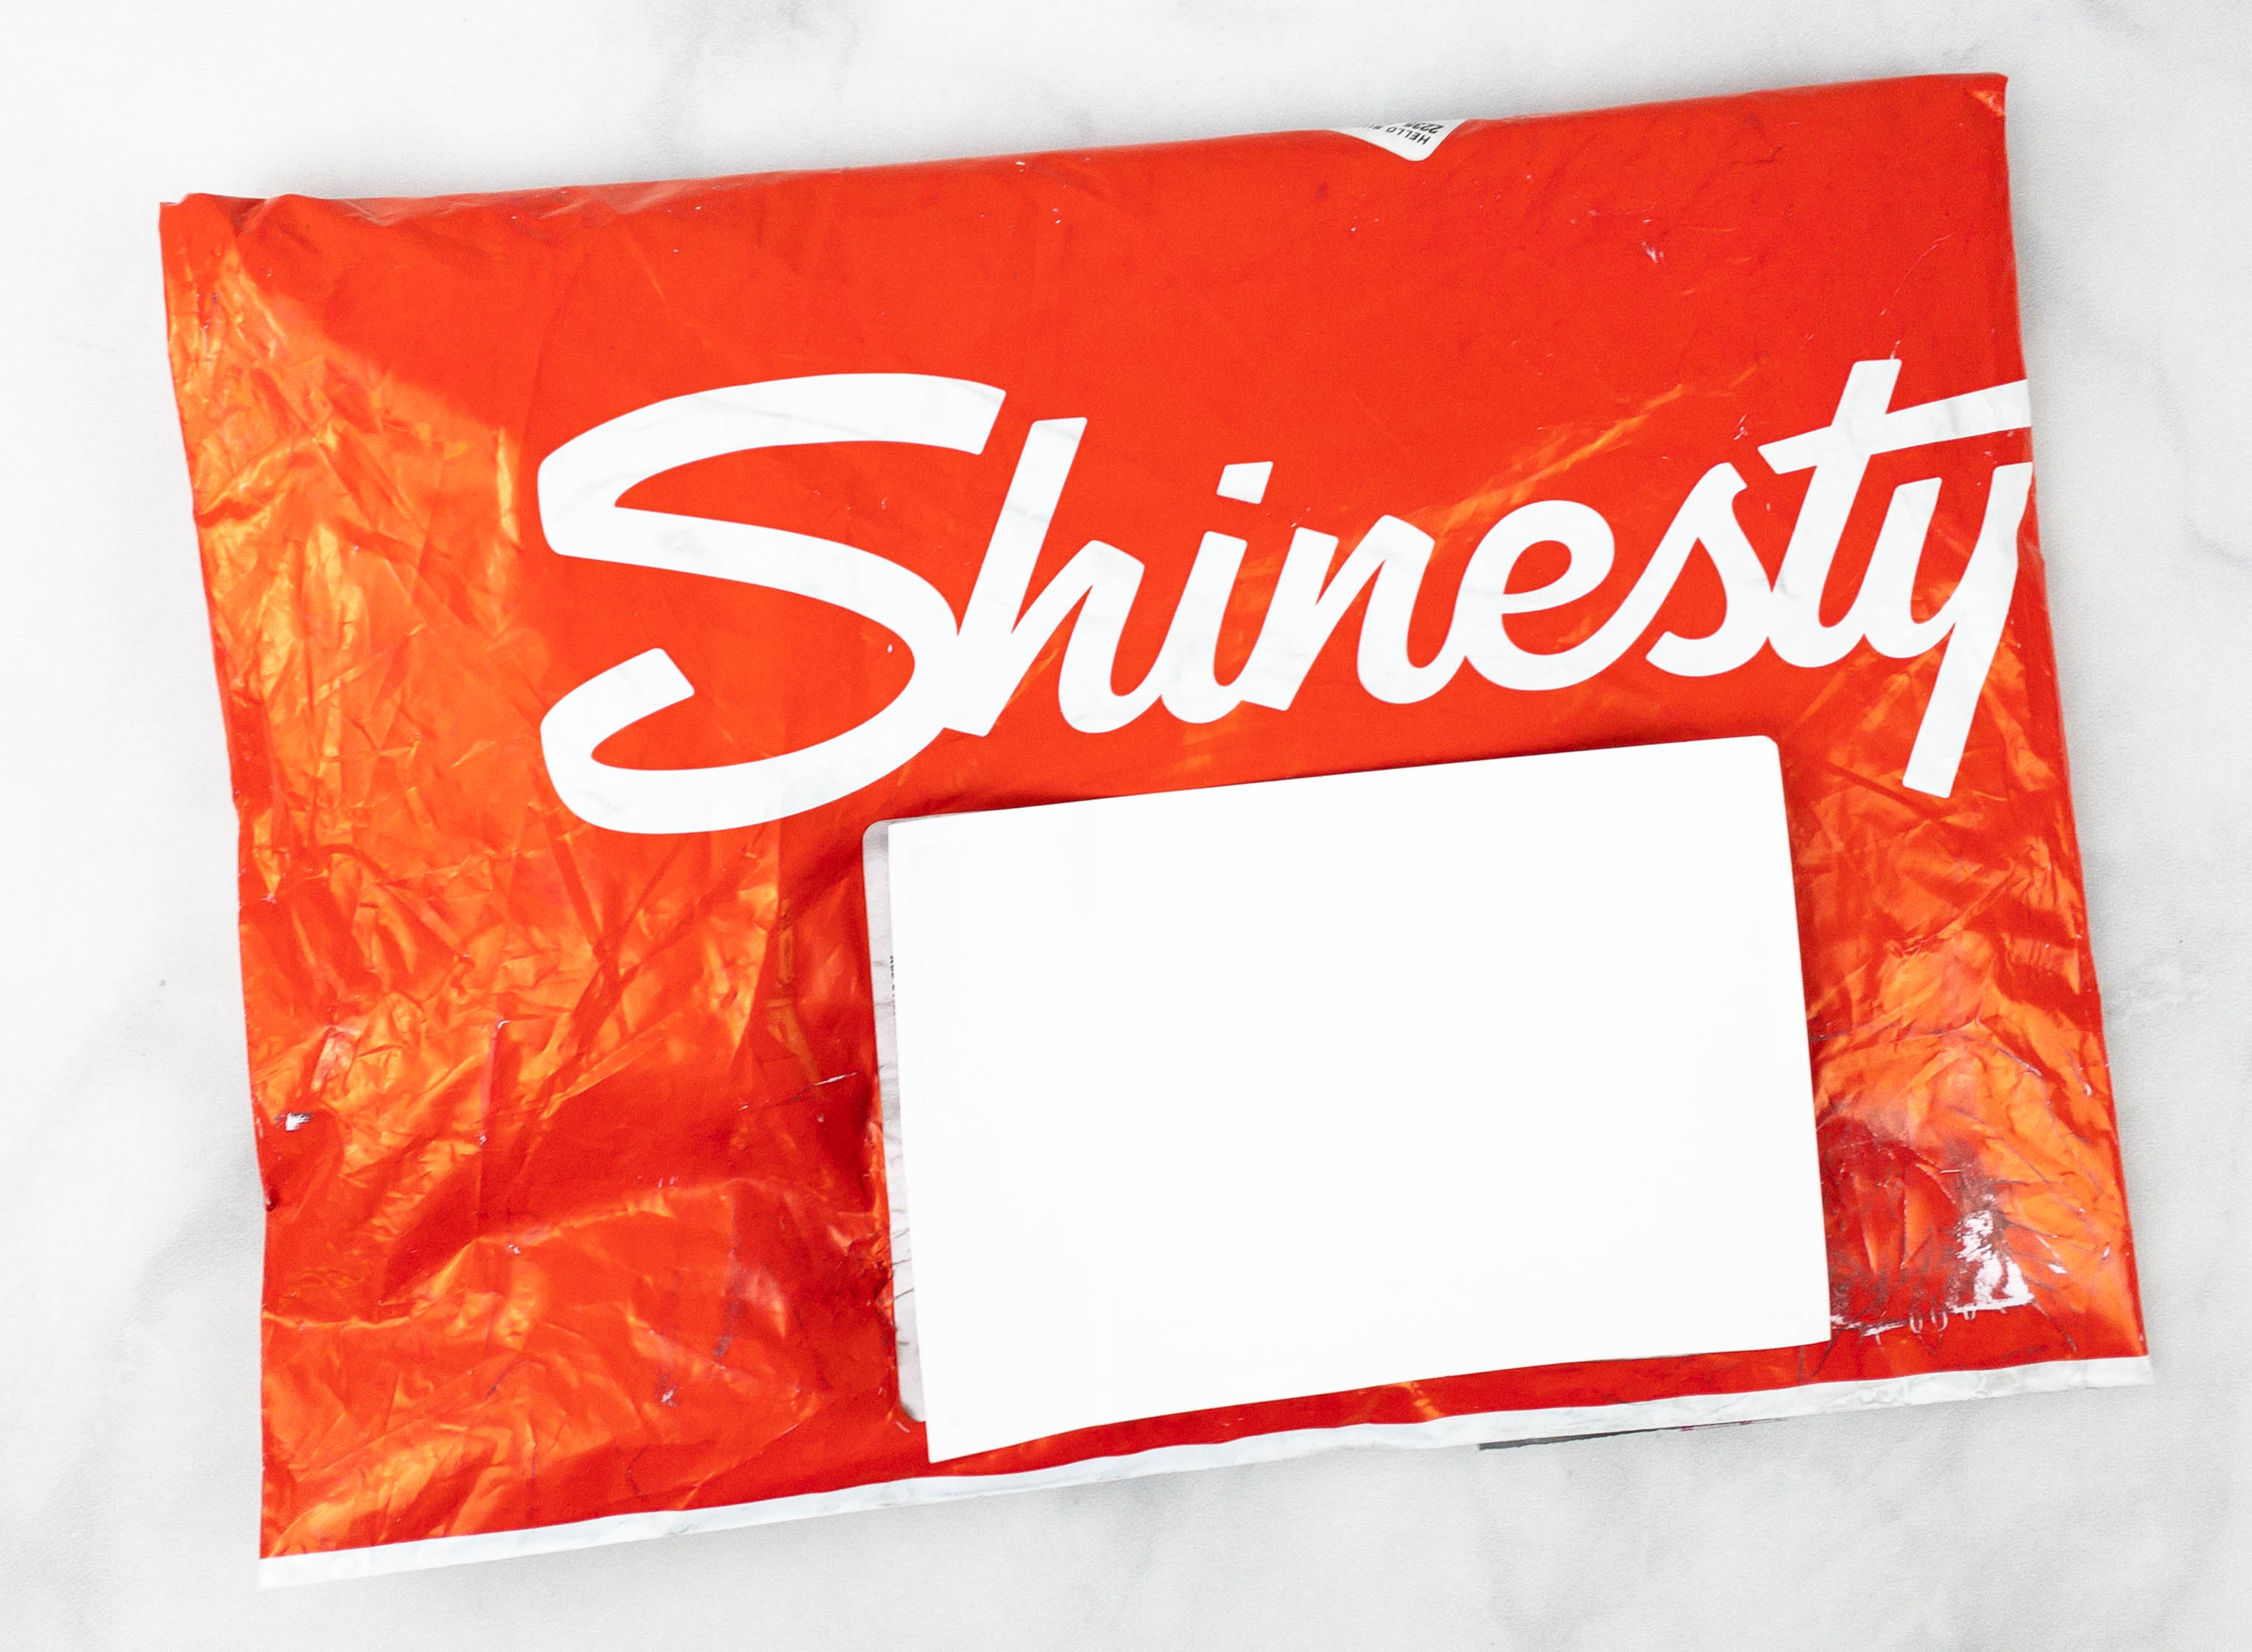 Shinesty Men's Boxers Subscription Review + Coupon - Hello Subscription